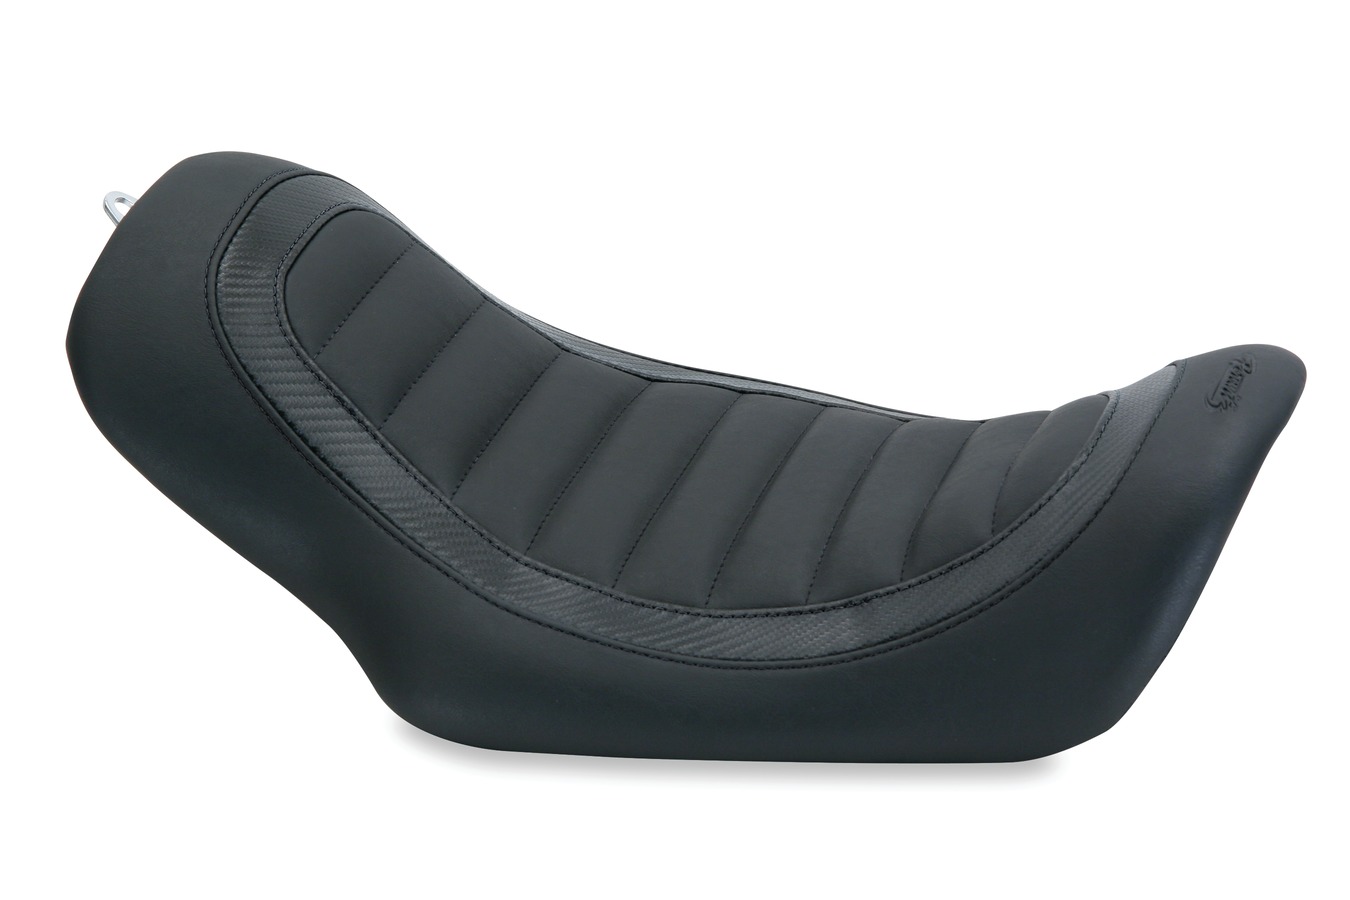 Signature Series Solo Seat by Jody Perewitz for Harley-Davidson Dyna 2006-